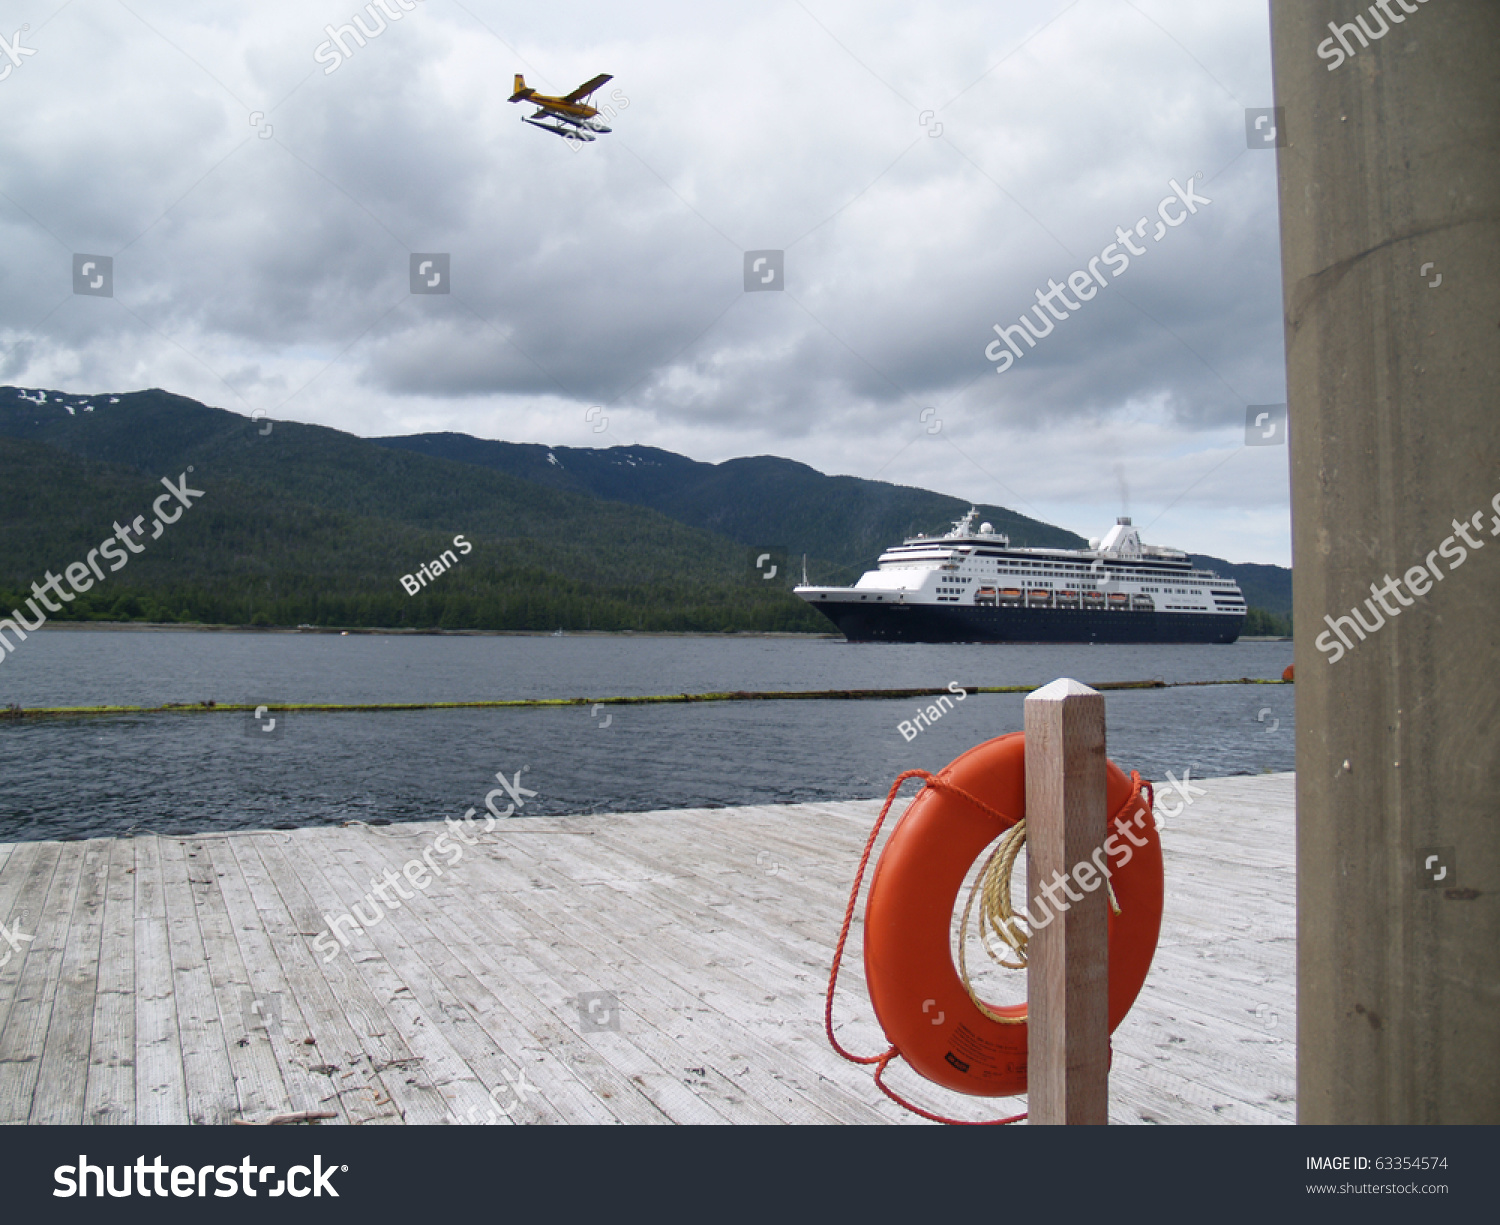 Float plane flys above incoming cruise ship with Ketchican pier and lifesaver in foreground. #63354574